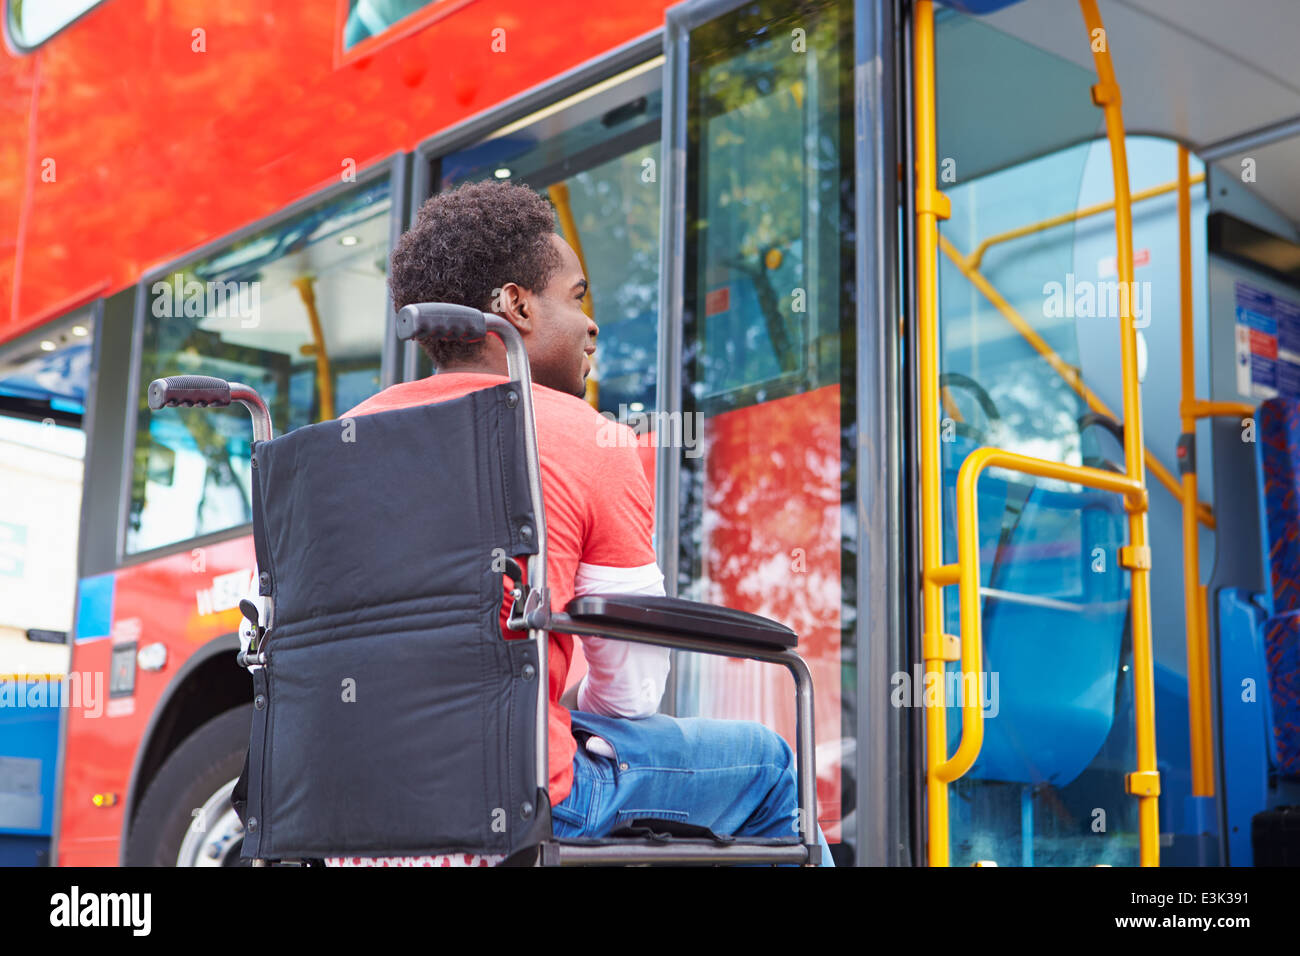 Disabled Man In Wheelchair Boarding Bus Stock Photo